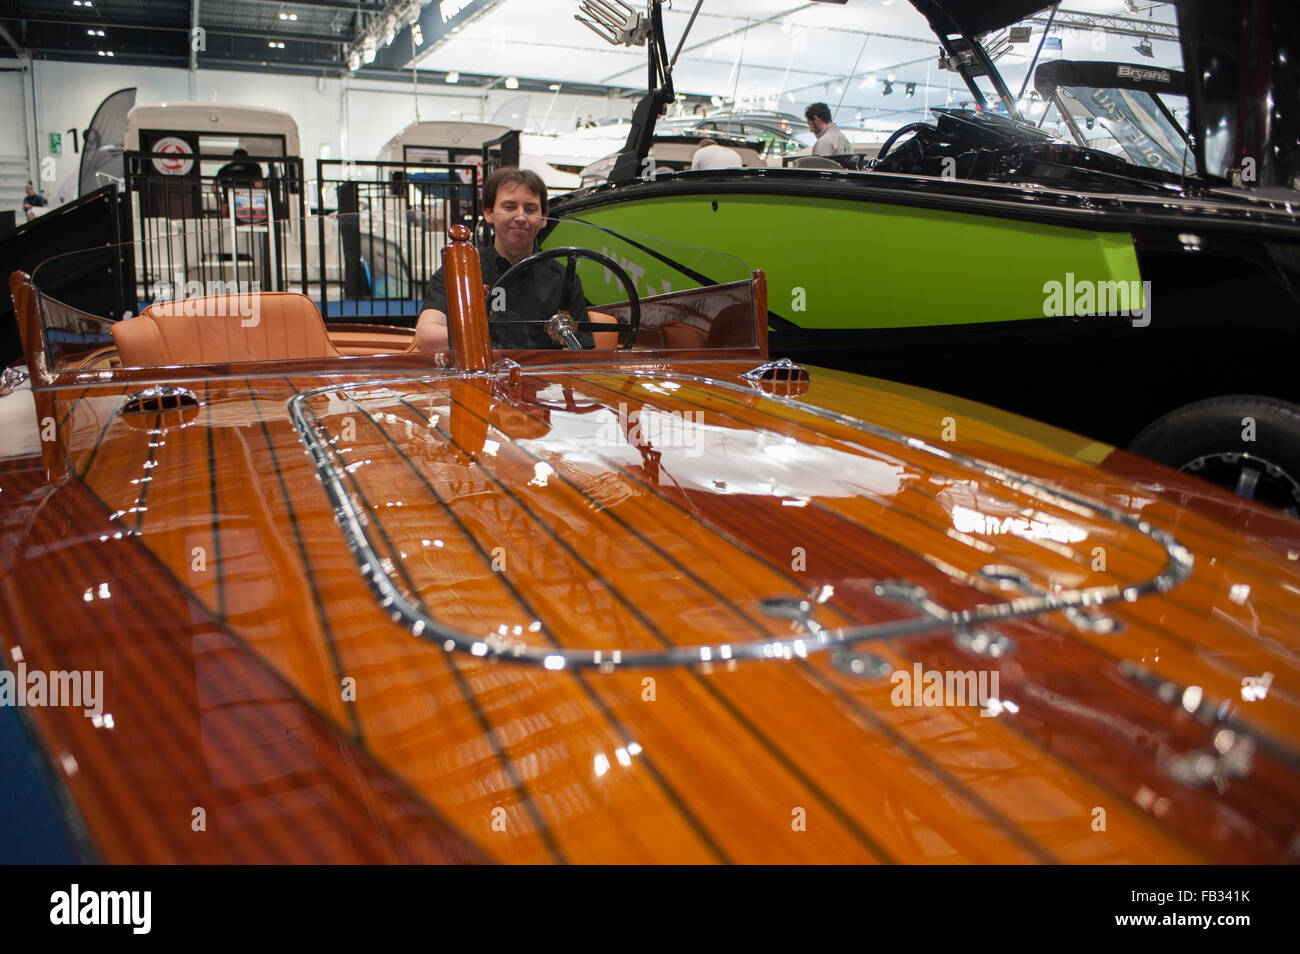 Excel, London, UK. 8th January, 2016. The new Super Launch from Fine Wooden Boats is introduced for the first time at the Boat Show. Handcrafted in Great Britain and protected by 25 coats of varnish, the Super Launch is brought to the show by Tom Neale - the man who restored the star of Boat Show 2014, a 1964 Riva Ariston.. Credit:  Malcolm Park editorial/Alamy Live News Stock Photo